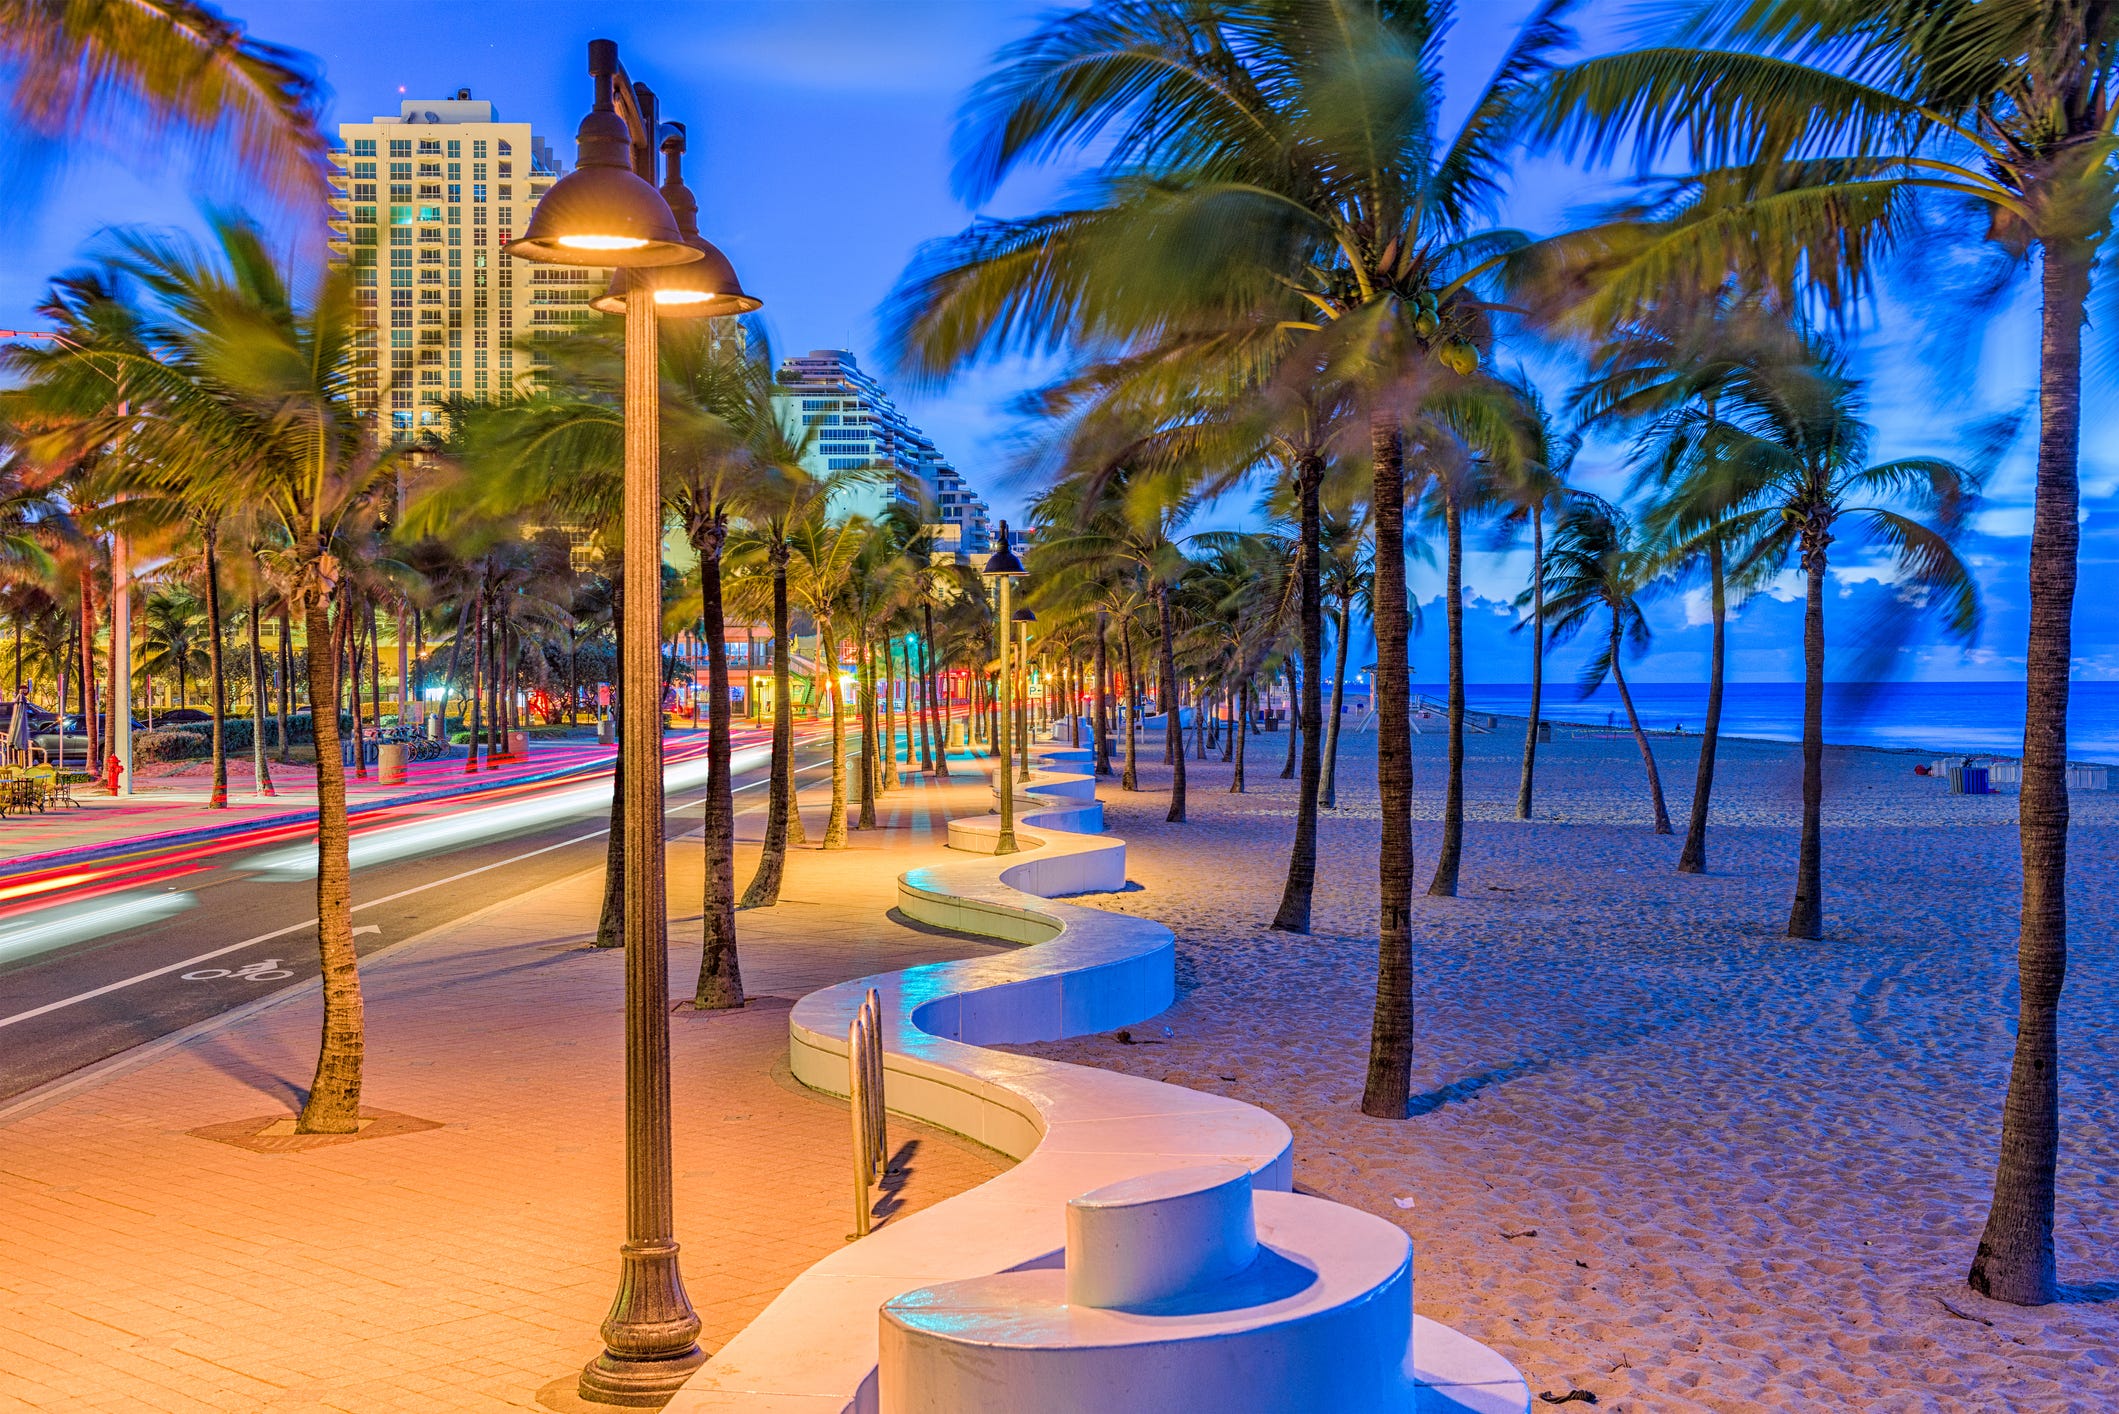 What Is the Best Time to Go to Fort Lauderdale?